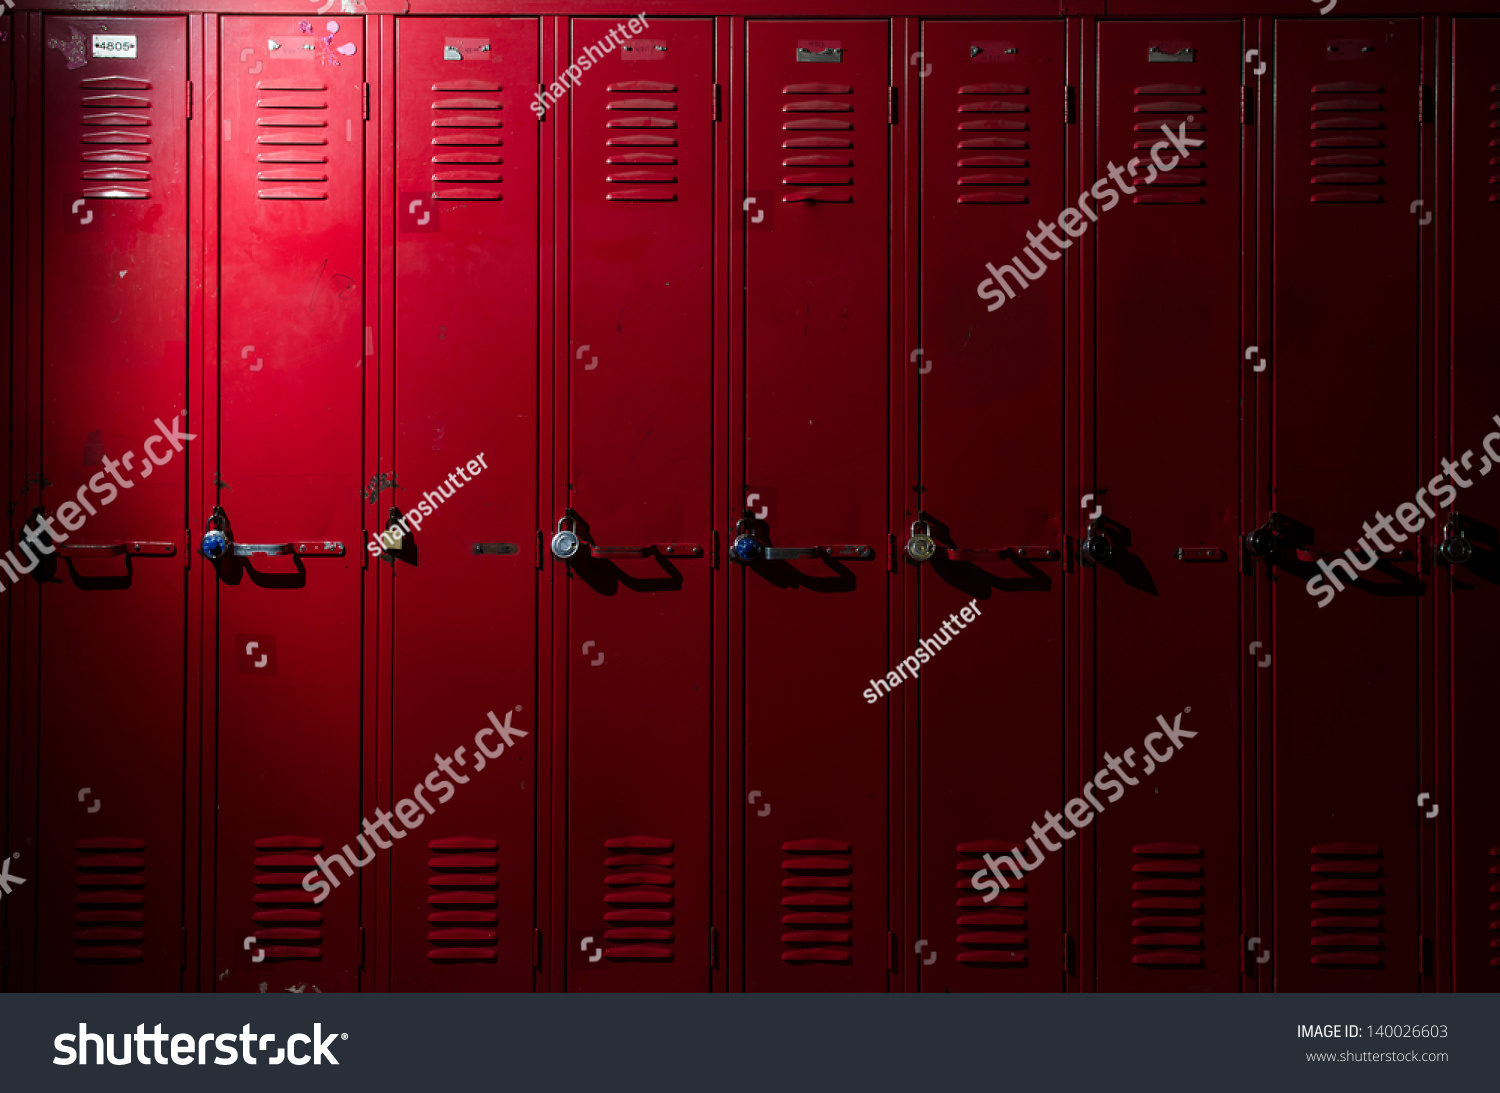 Image of a row of lockers with dramatic lighting #140026603